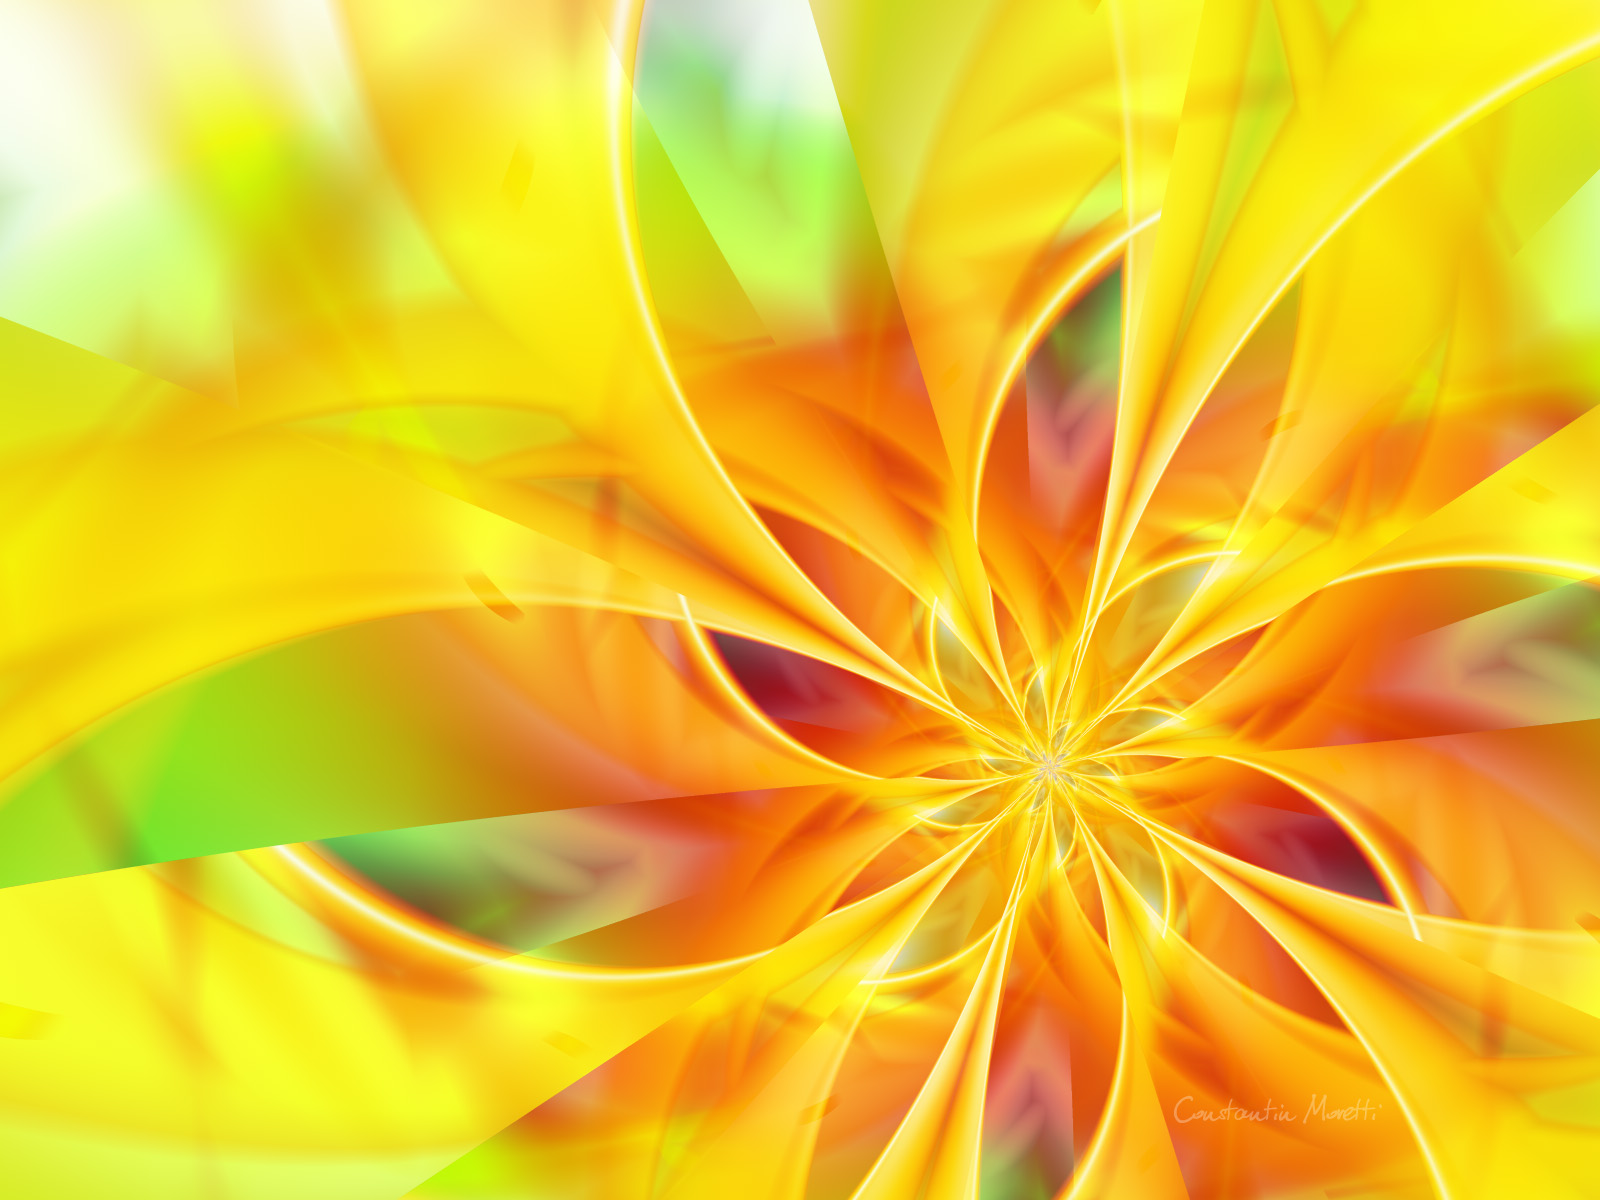 Wallpaper Details File Name Yellow Abstract Uploaded By